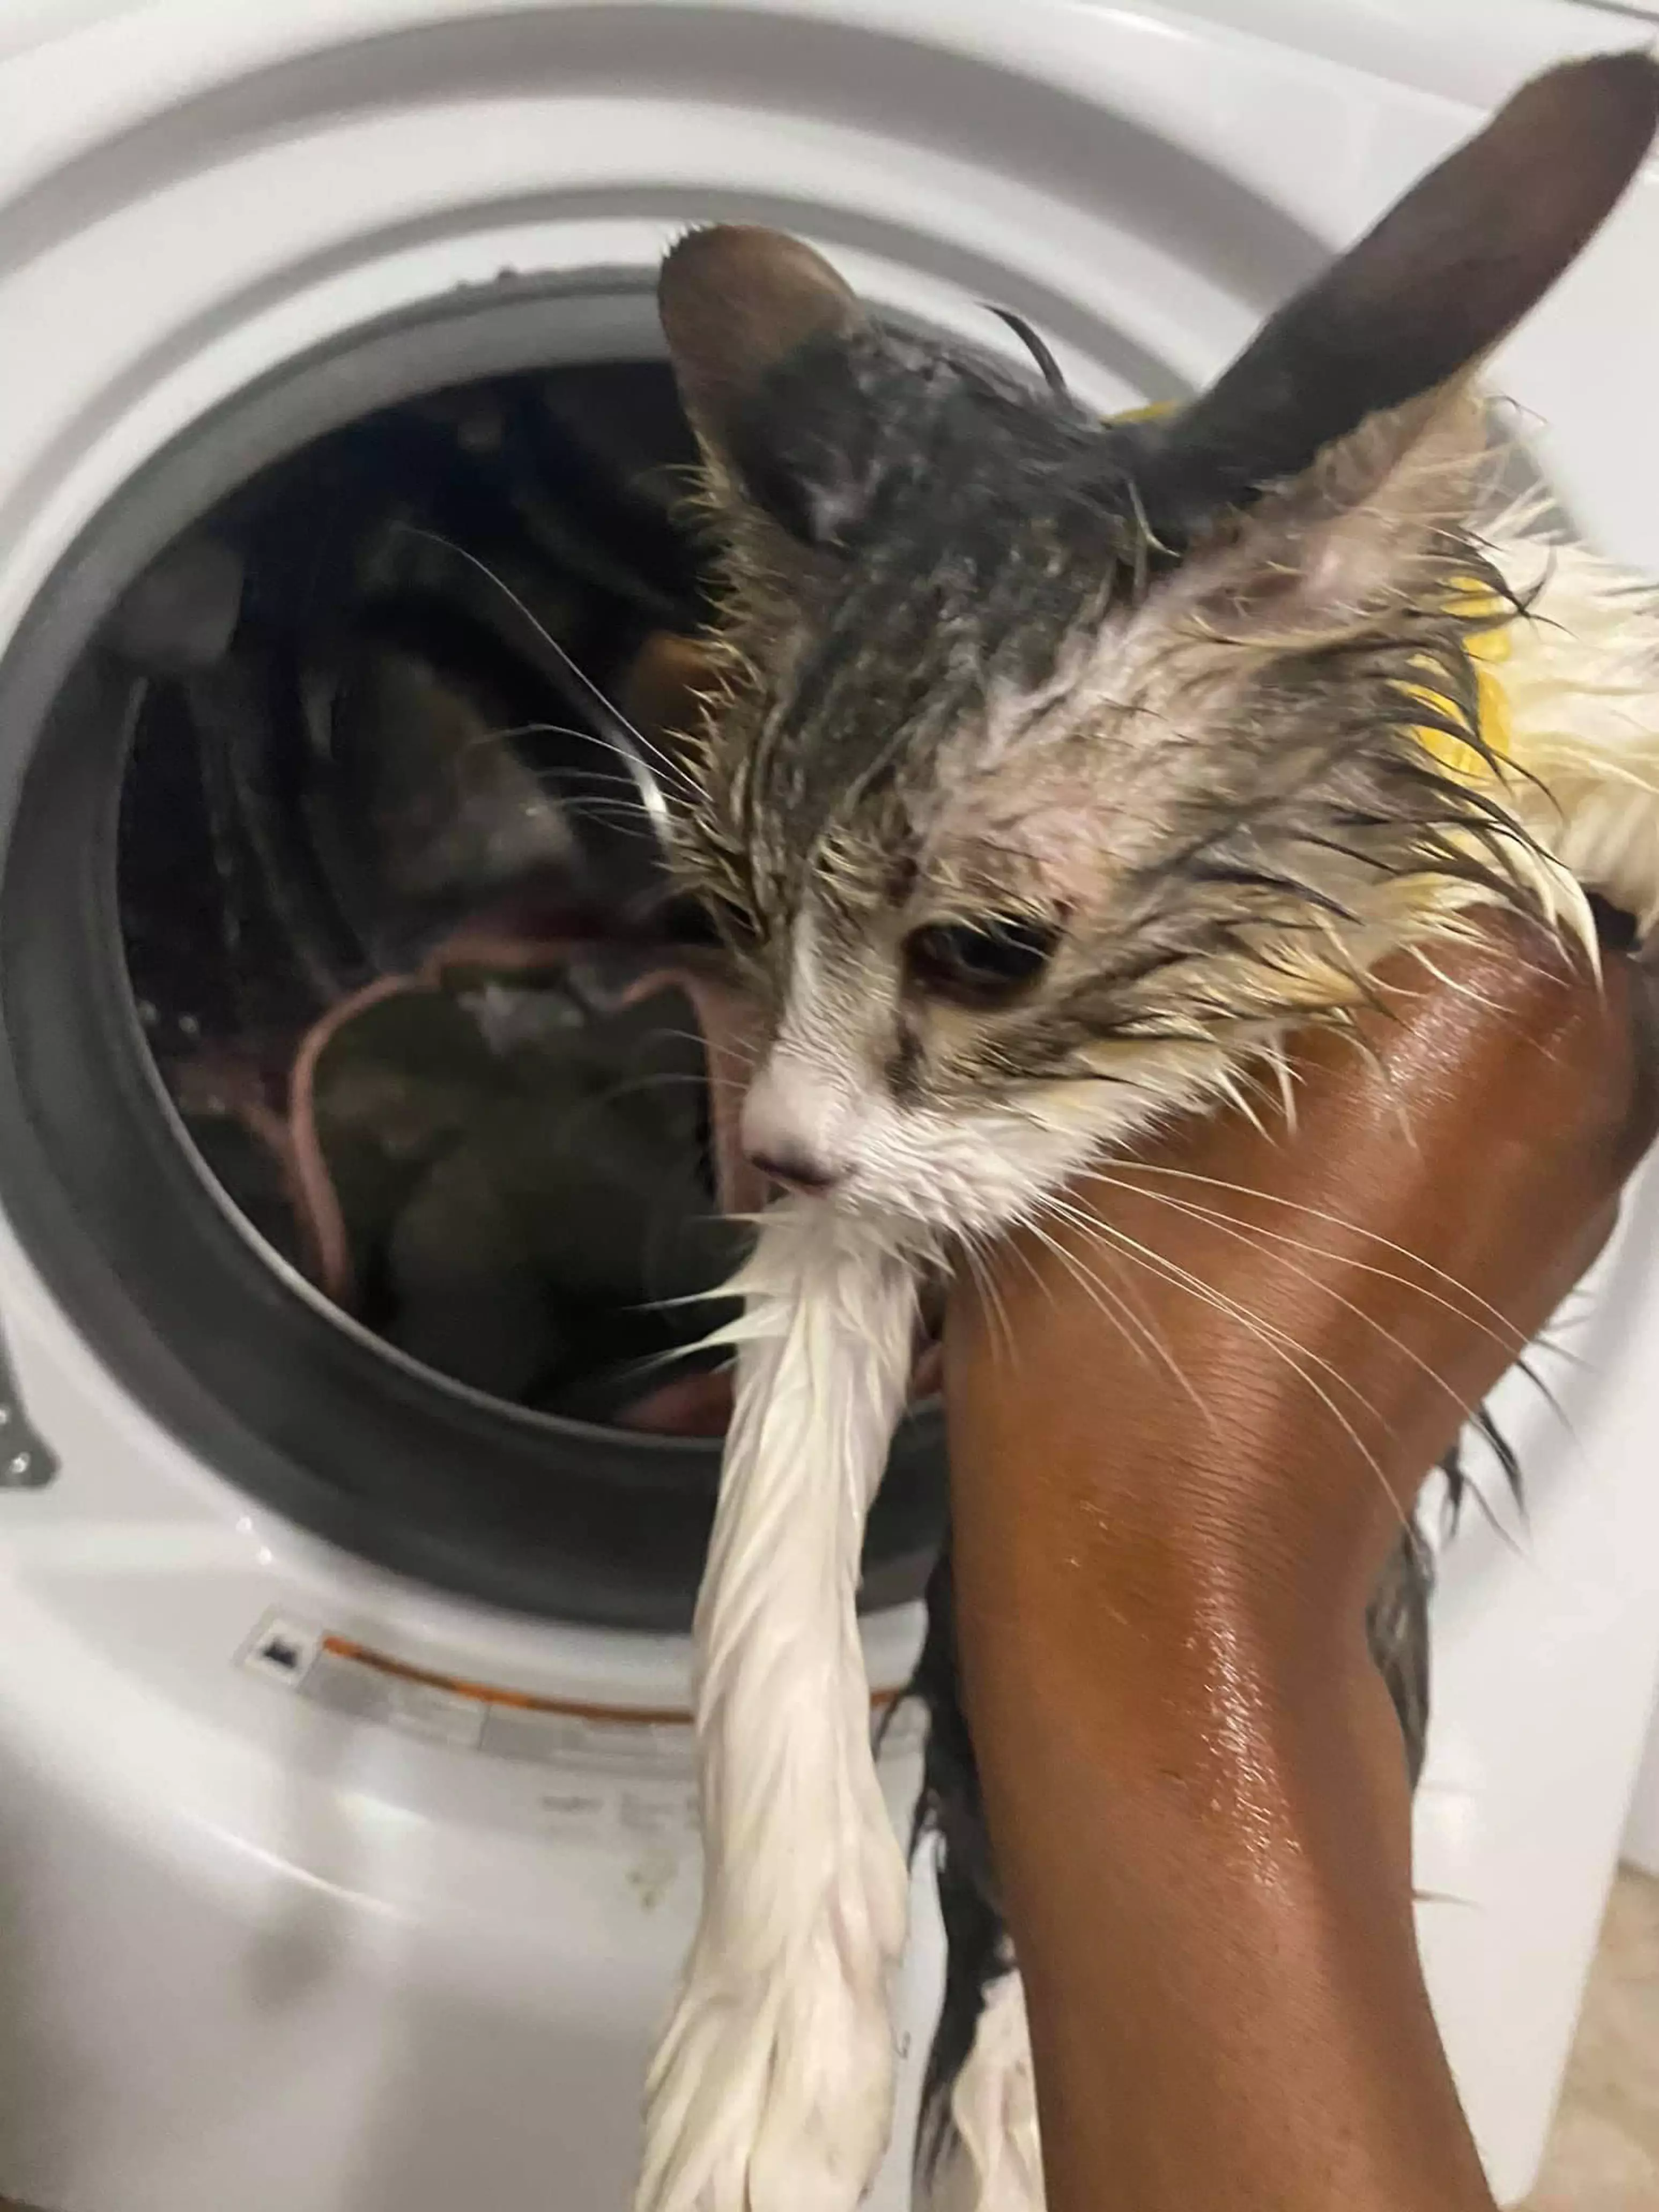 Janae Blackman, 22, managed to save her cat Optimus Jack after he entered the washing machine (